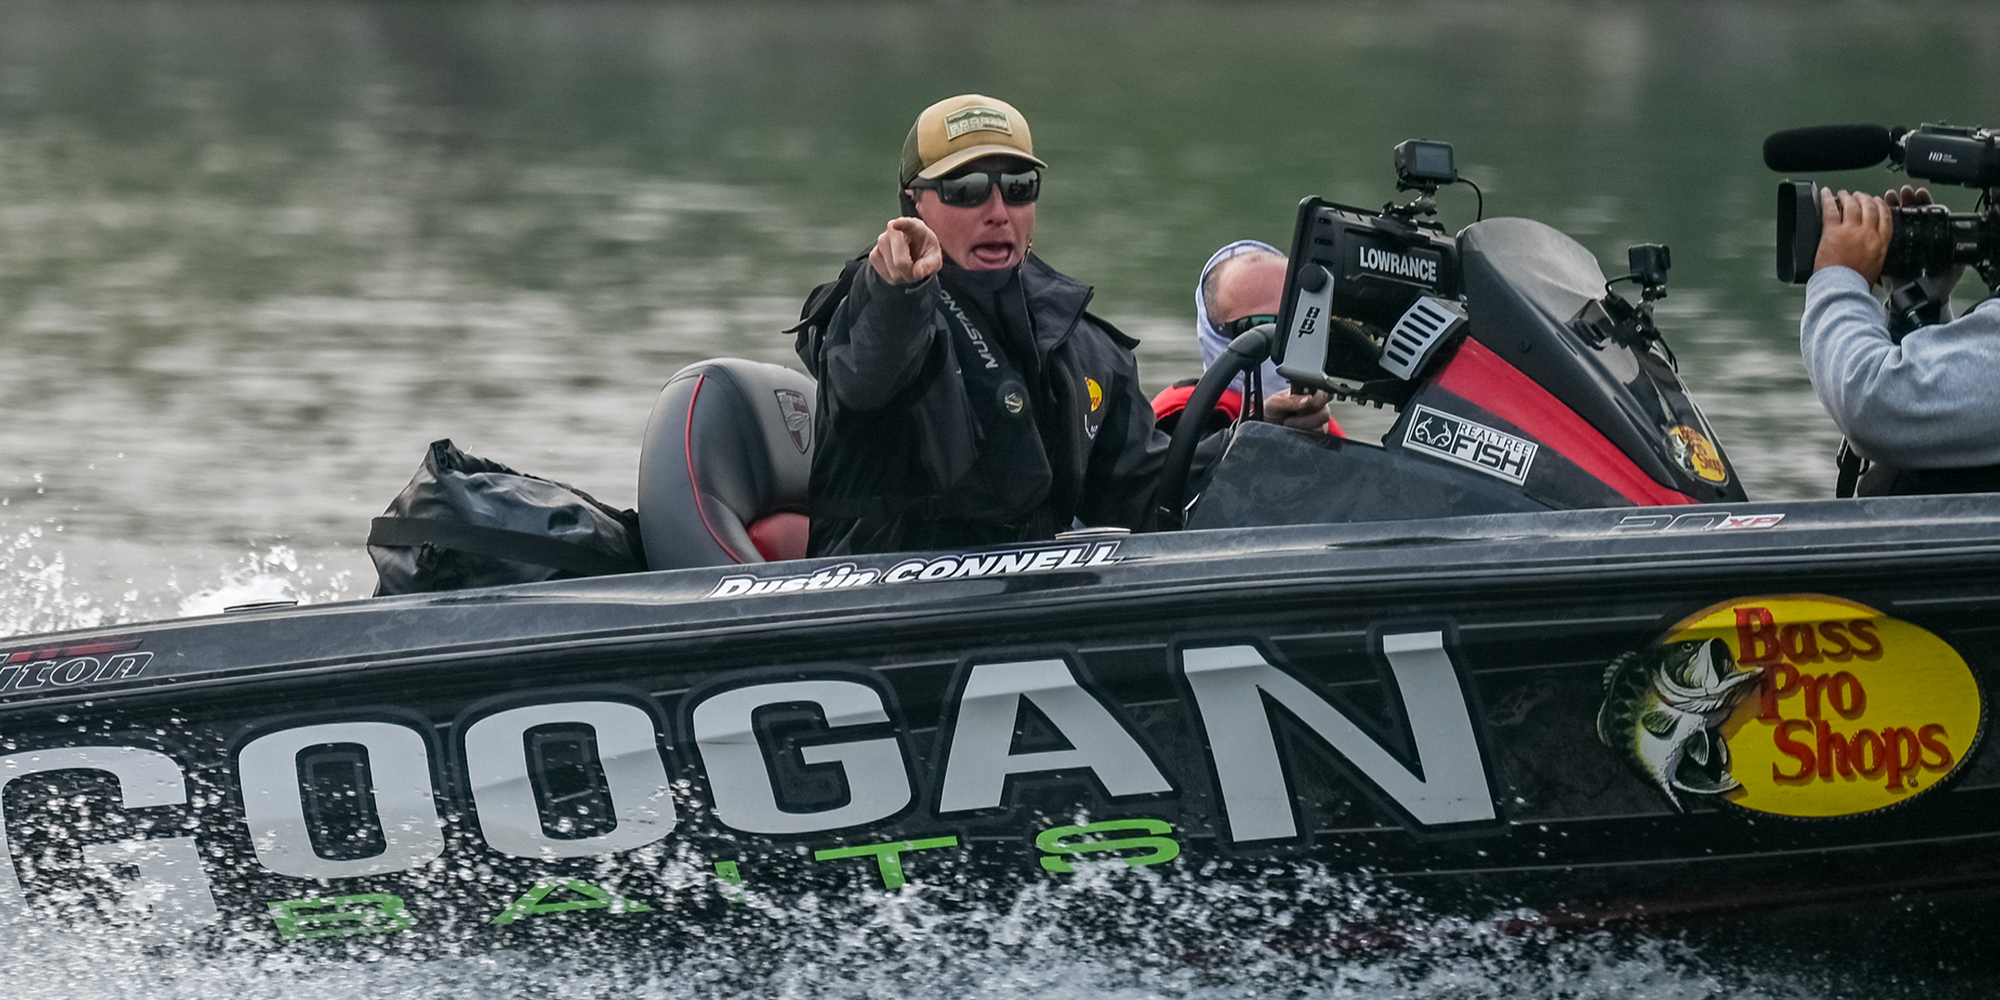 GALLERY: Stage Five kicks off from Cayuga - Major League Fishing